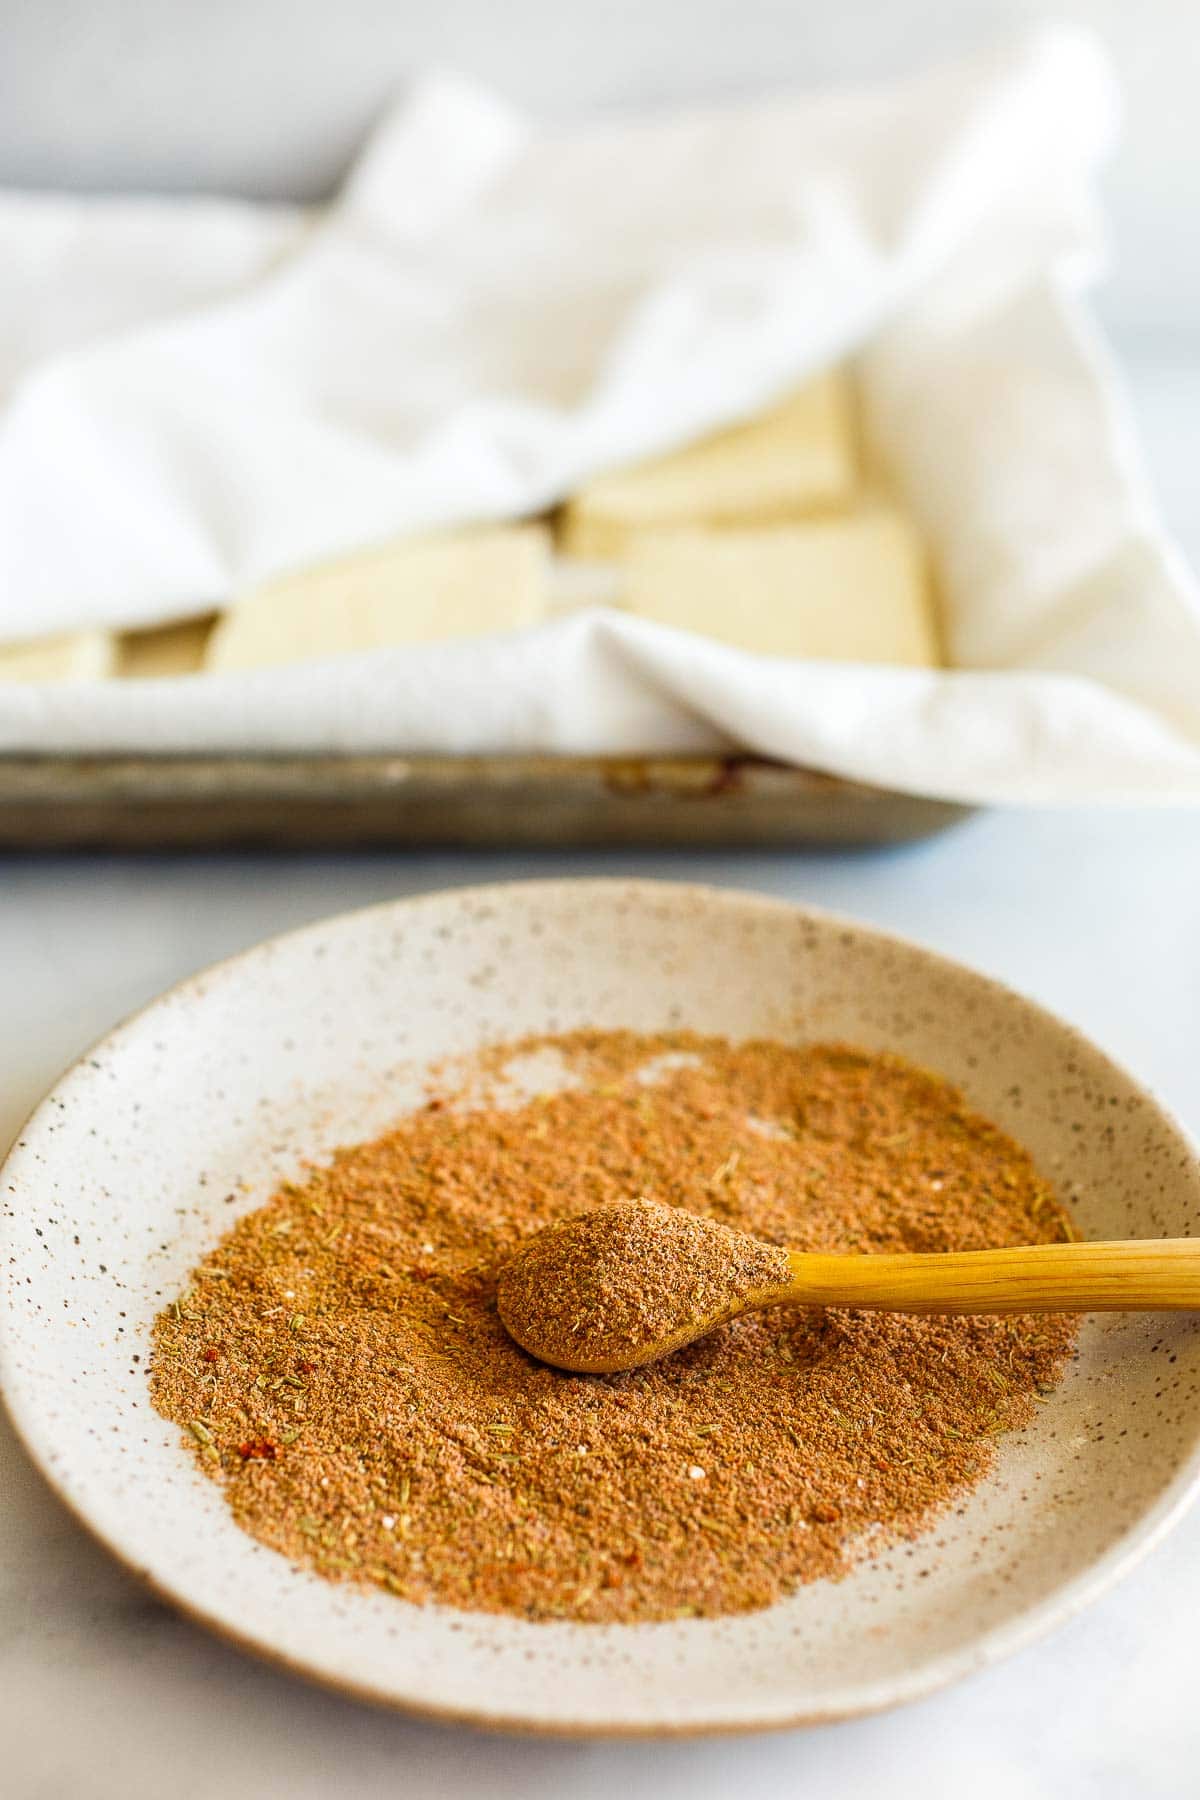 Spice mix for tofu.